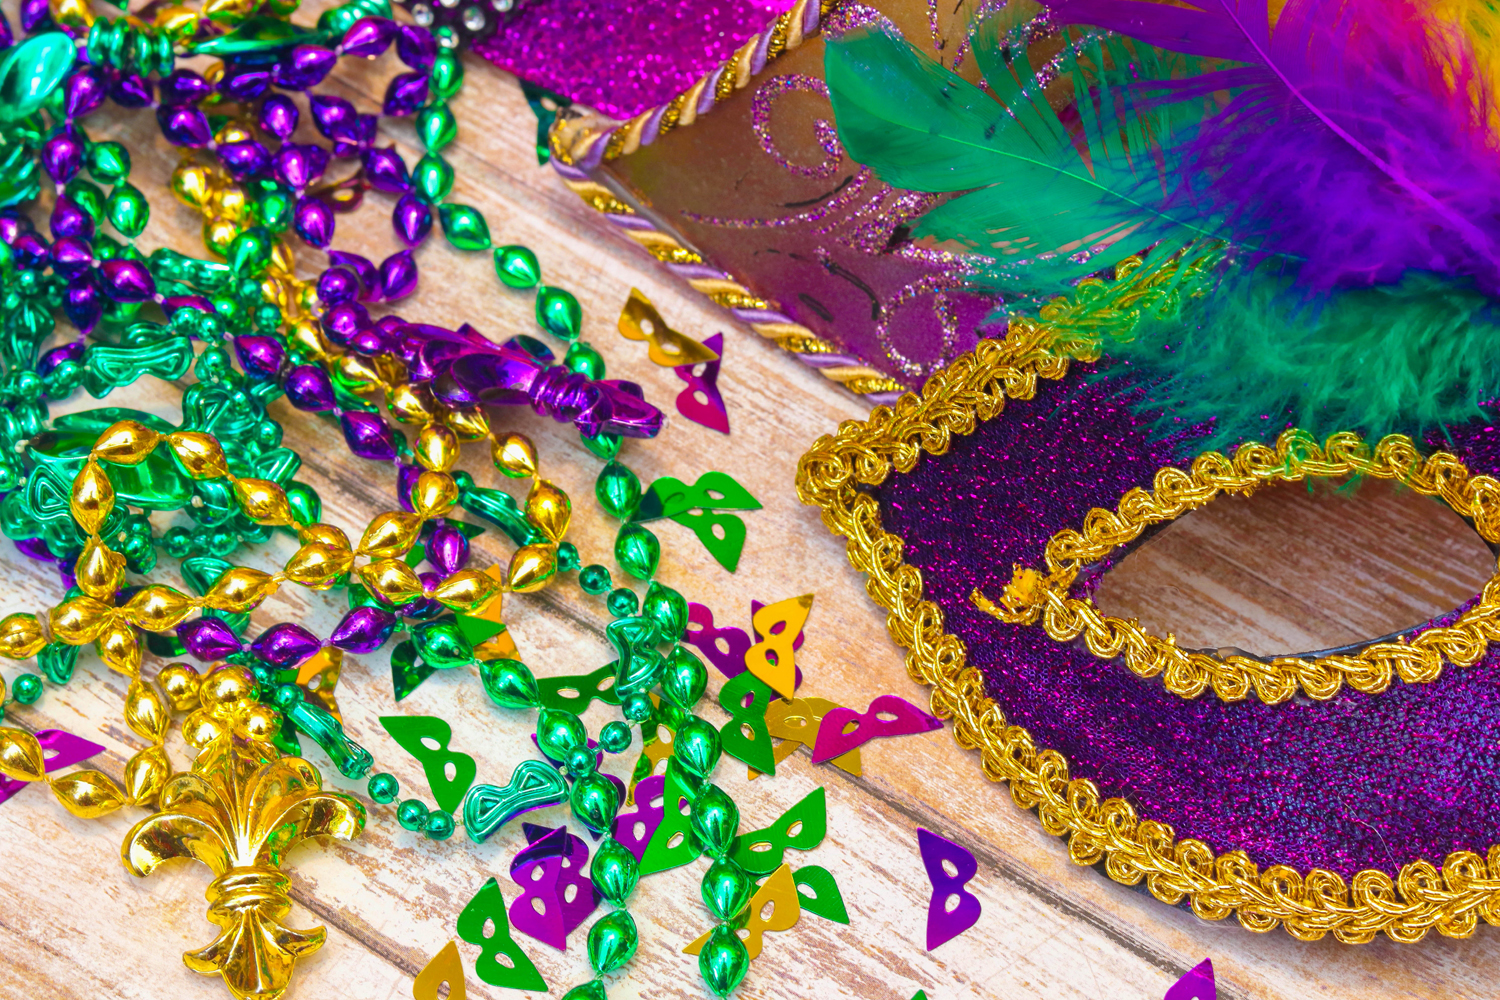 How to enjoy a safe Mardi Gras this year - Celebrating Mardi Gras at home may be the safest bet. The following tips can help make such celebrations more festive. #MardiGras